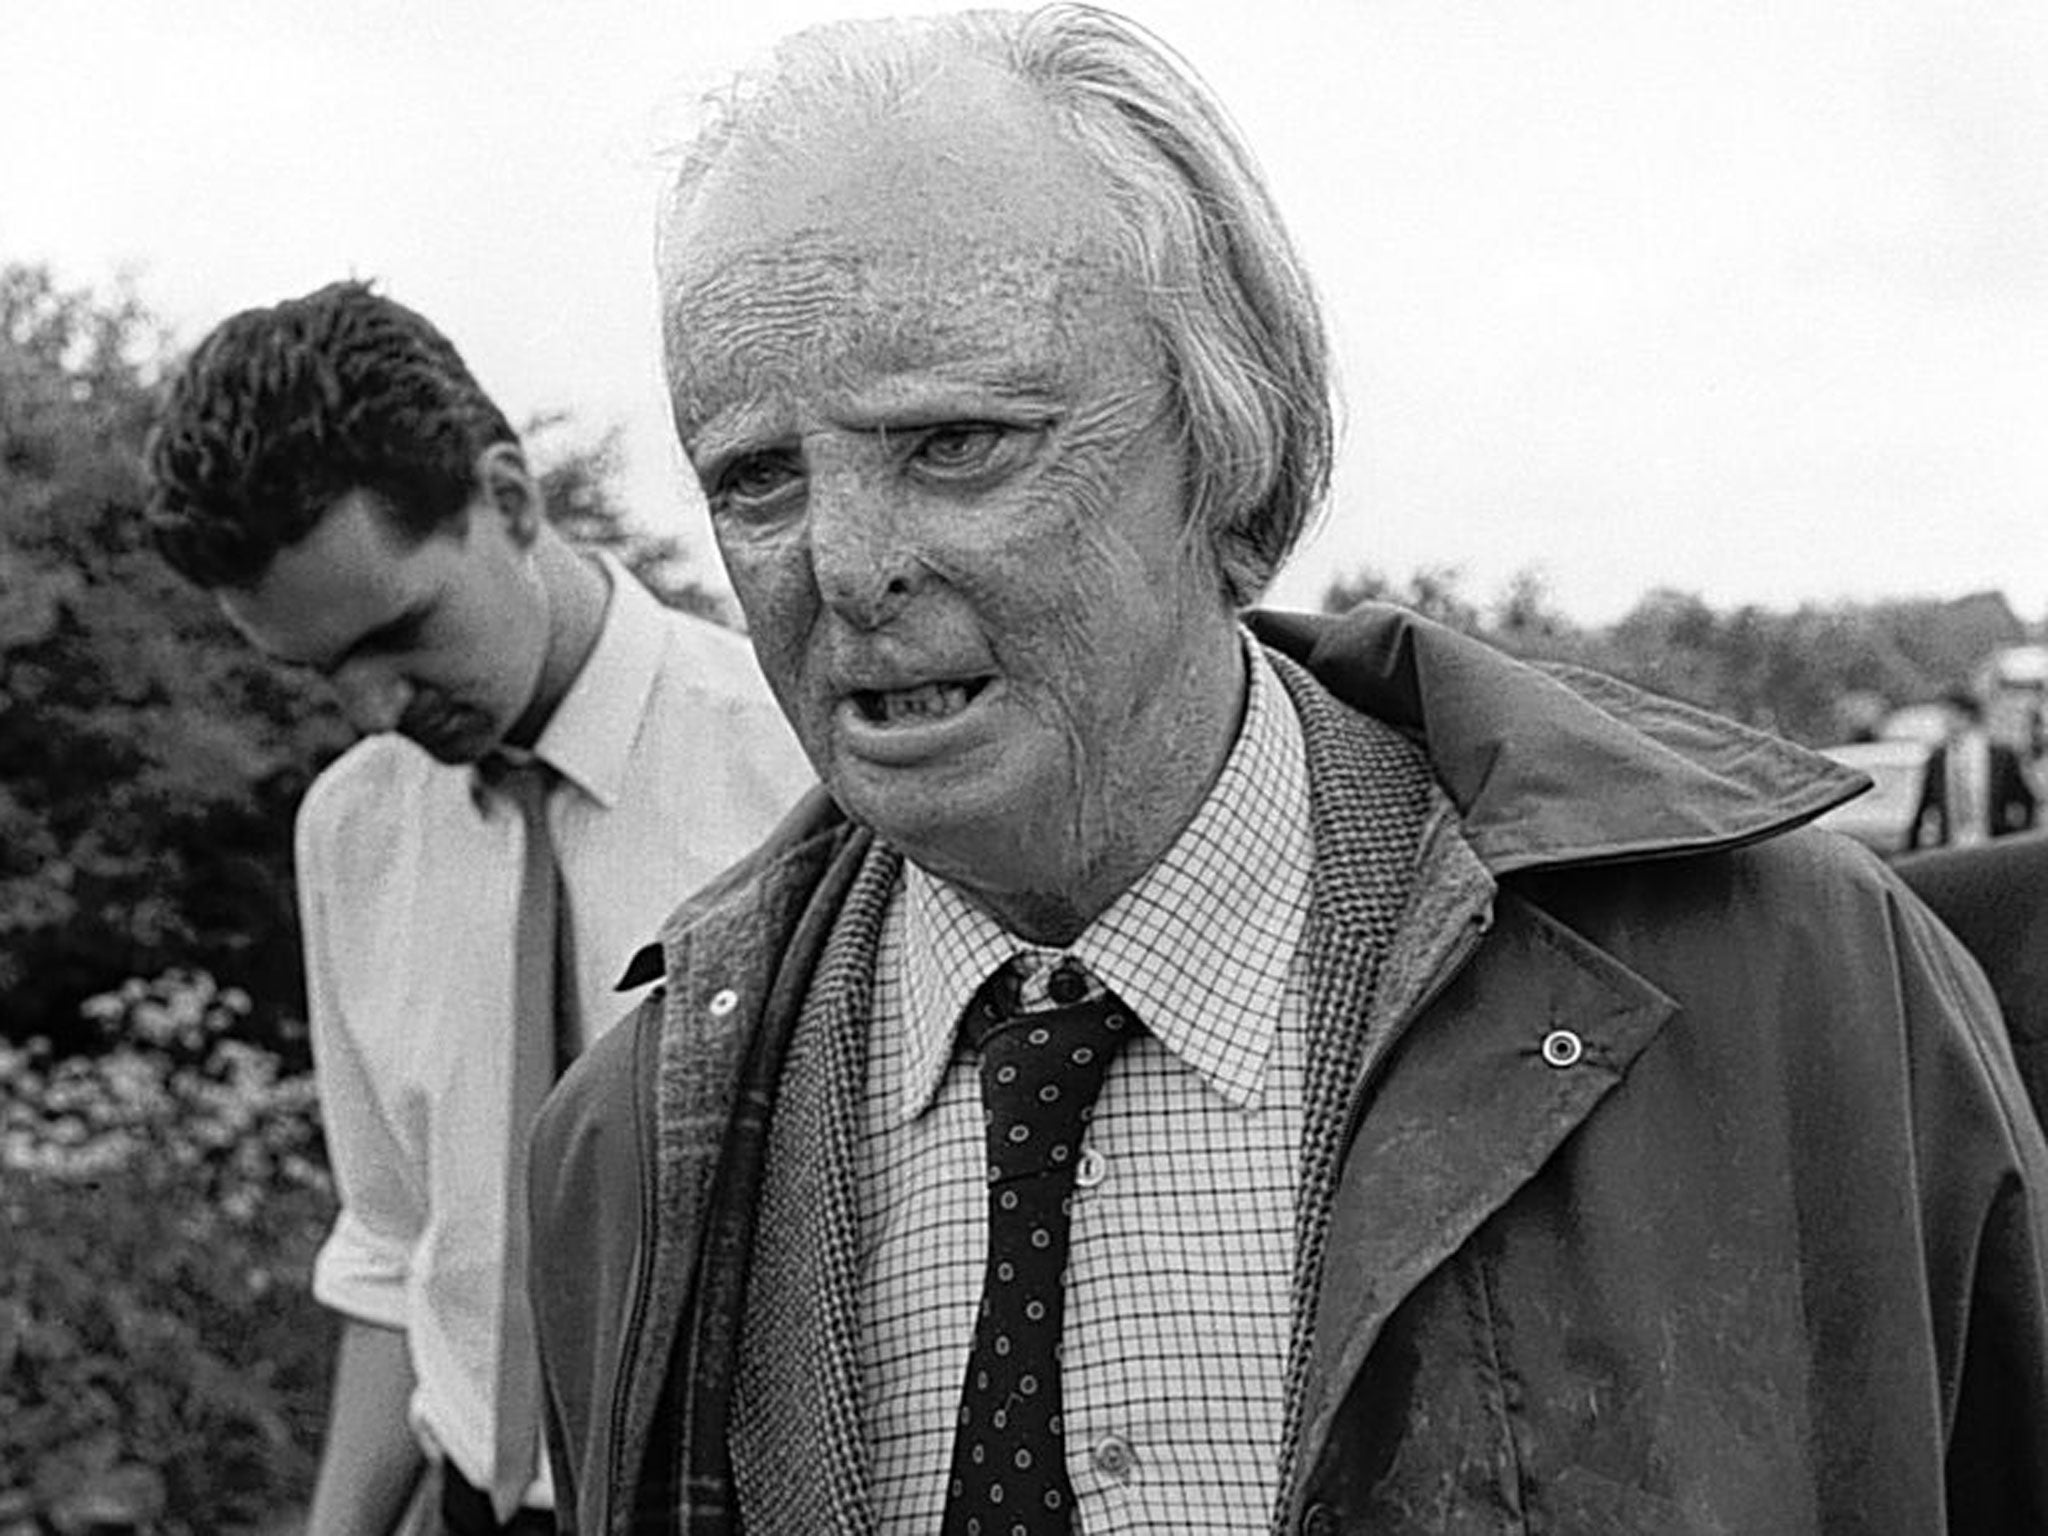 Boscawen in 1986: he was a dedicated constituency MP who rose up the Tory Whips' hierarchy